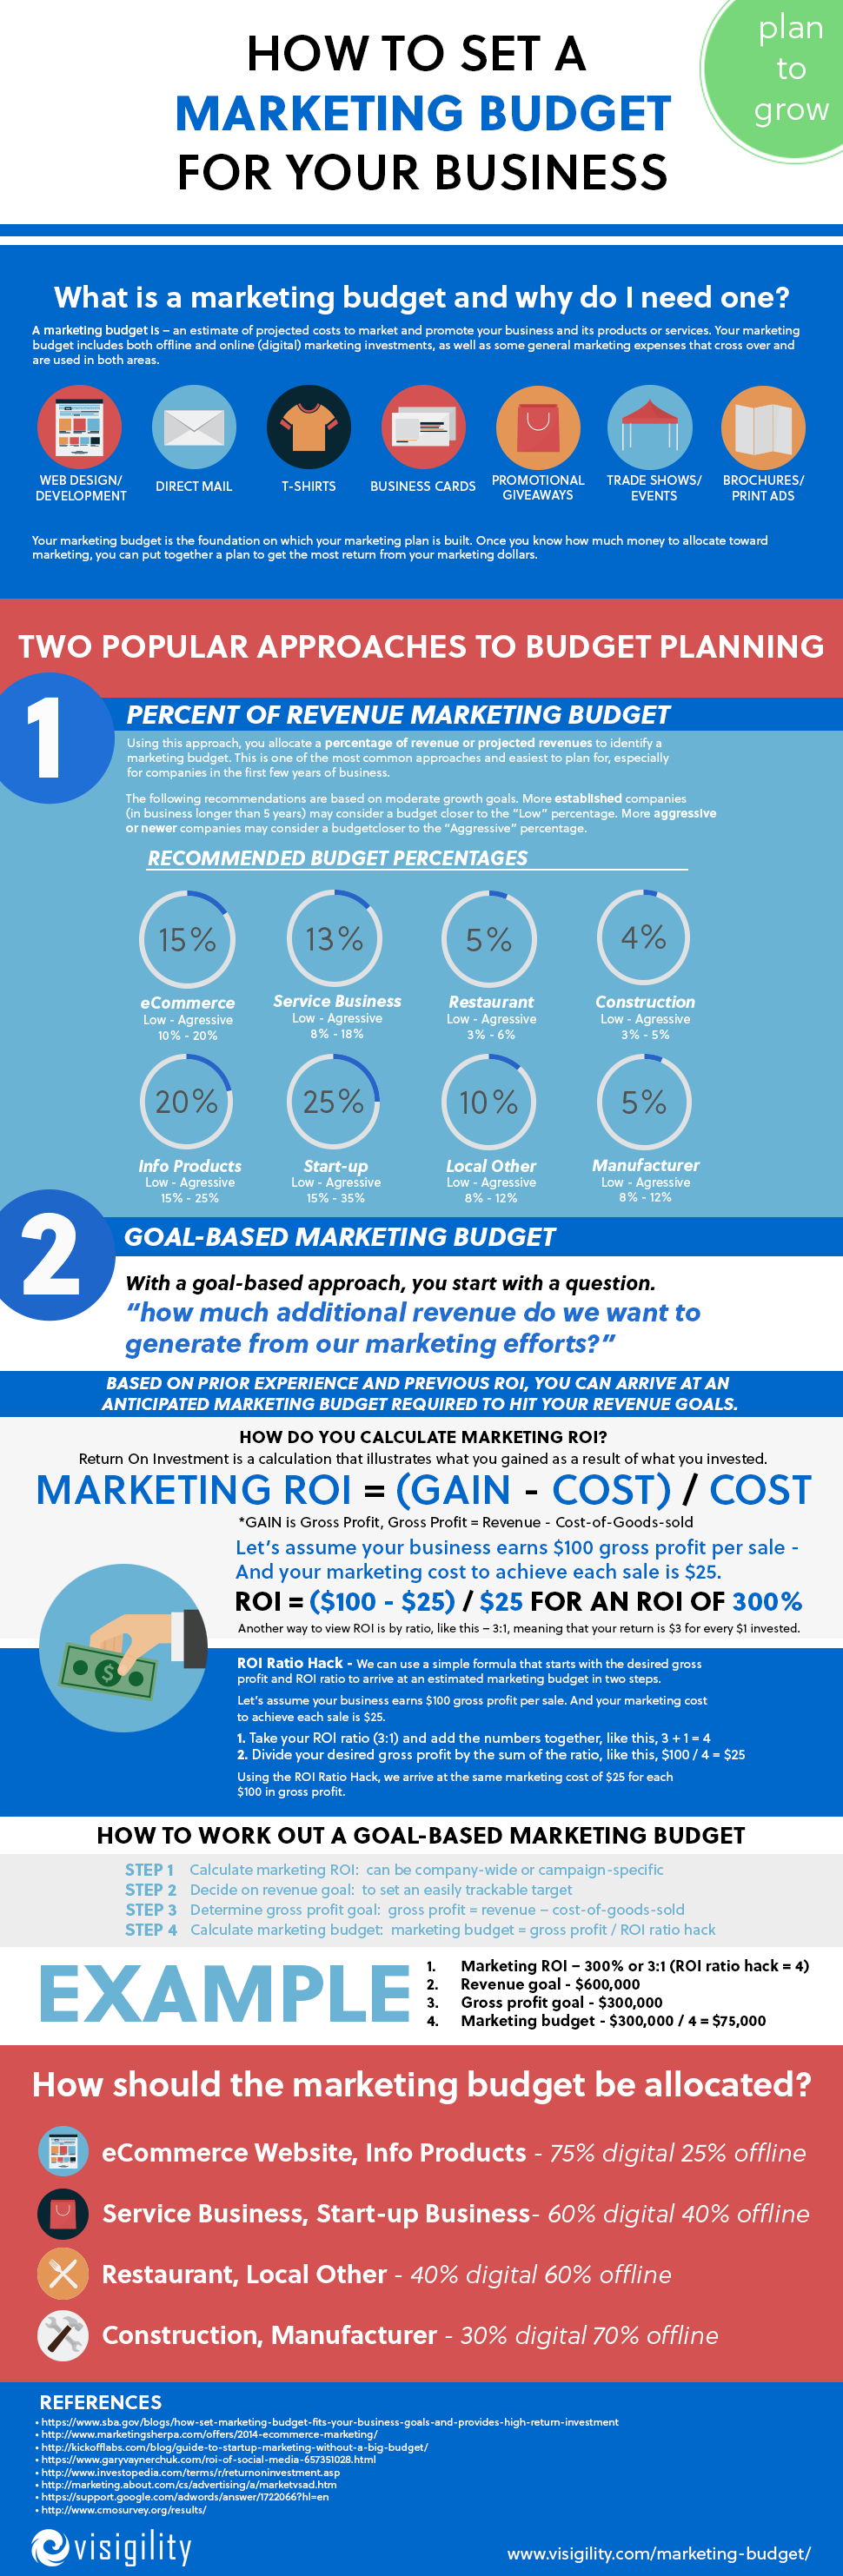 How To Set A Marketing Budget For Your Business